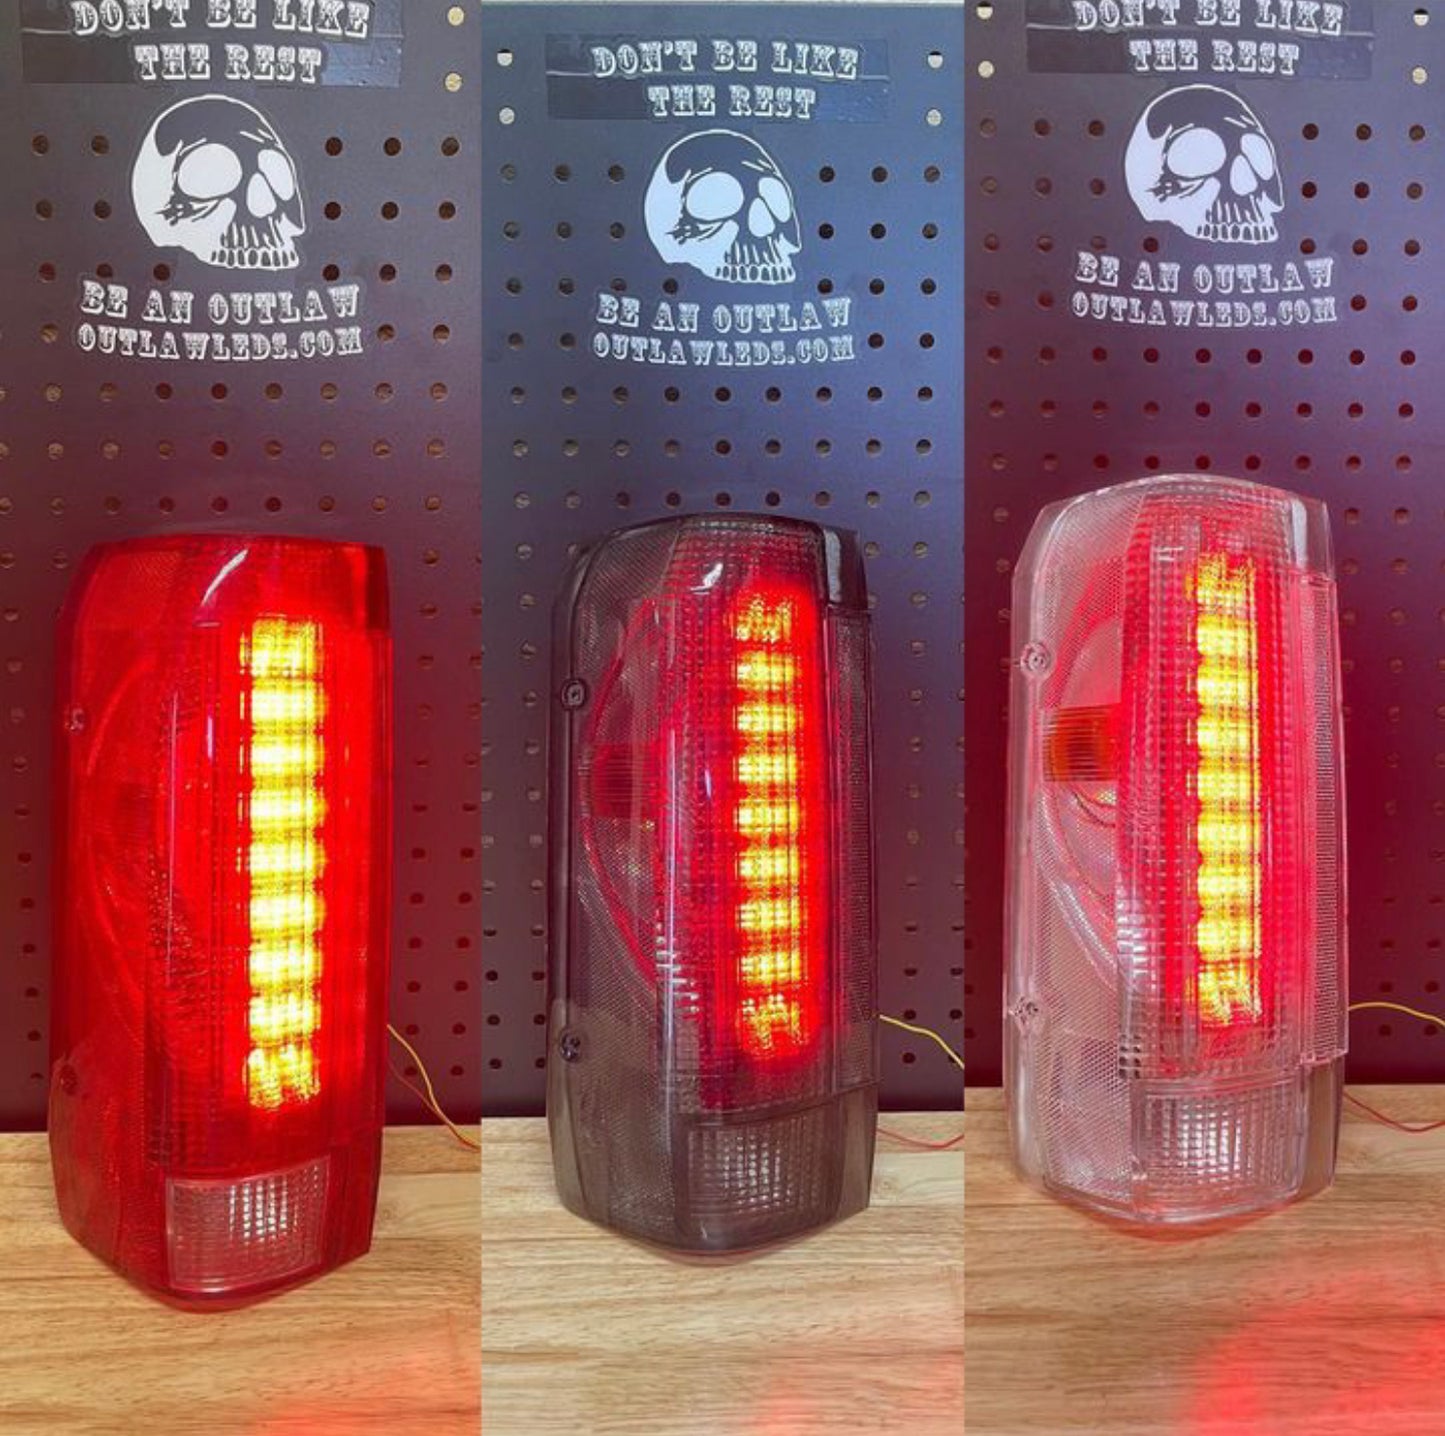 1987-1997 Ford OBS LED Tail Lights